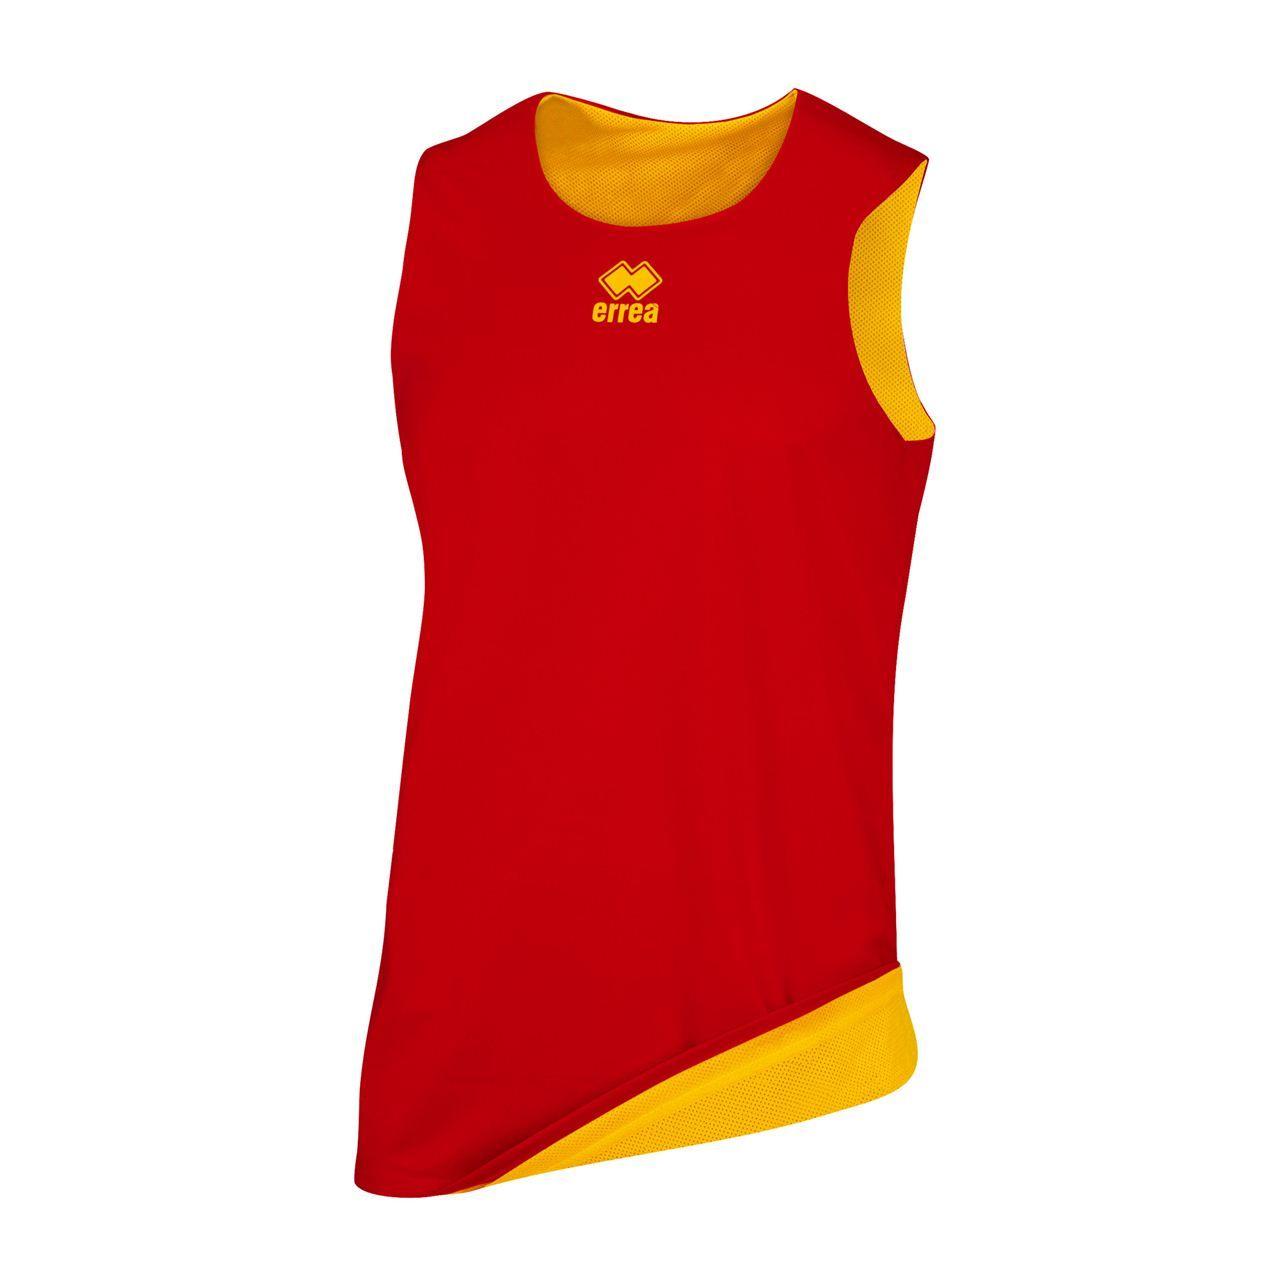 Red and Yellow Sports Logo - Errea Chicago Double Vest Senior Red Yellow